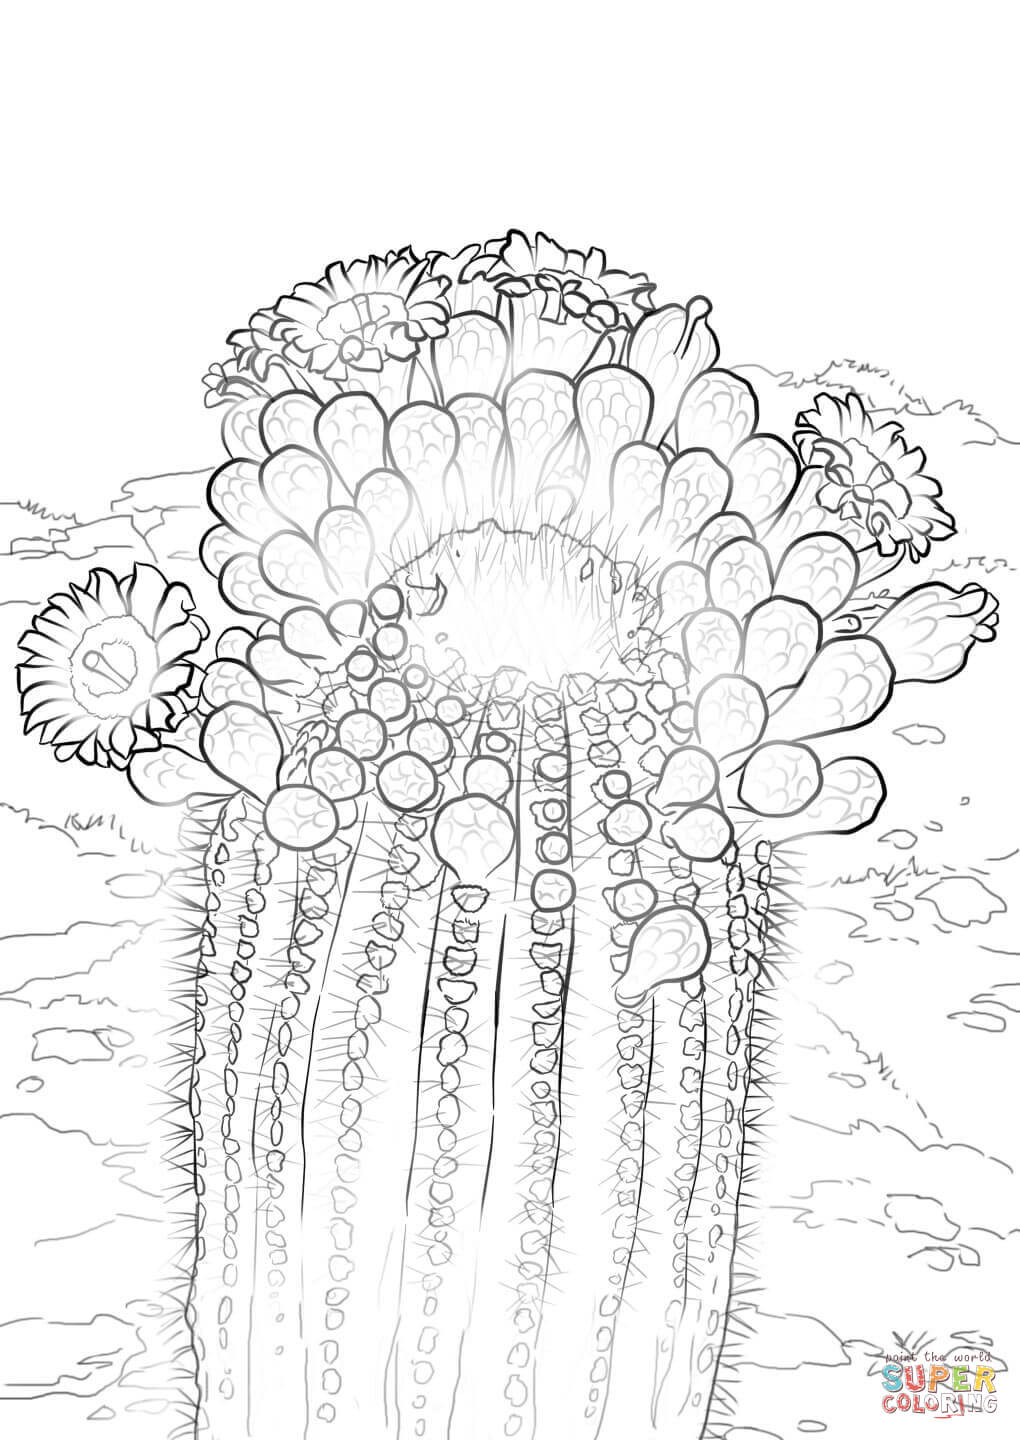 Cactus Blossom coloring #19, Download drawings